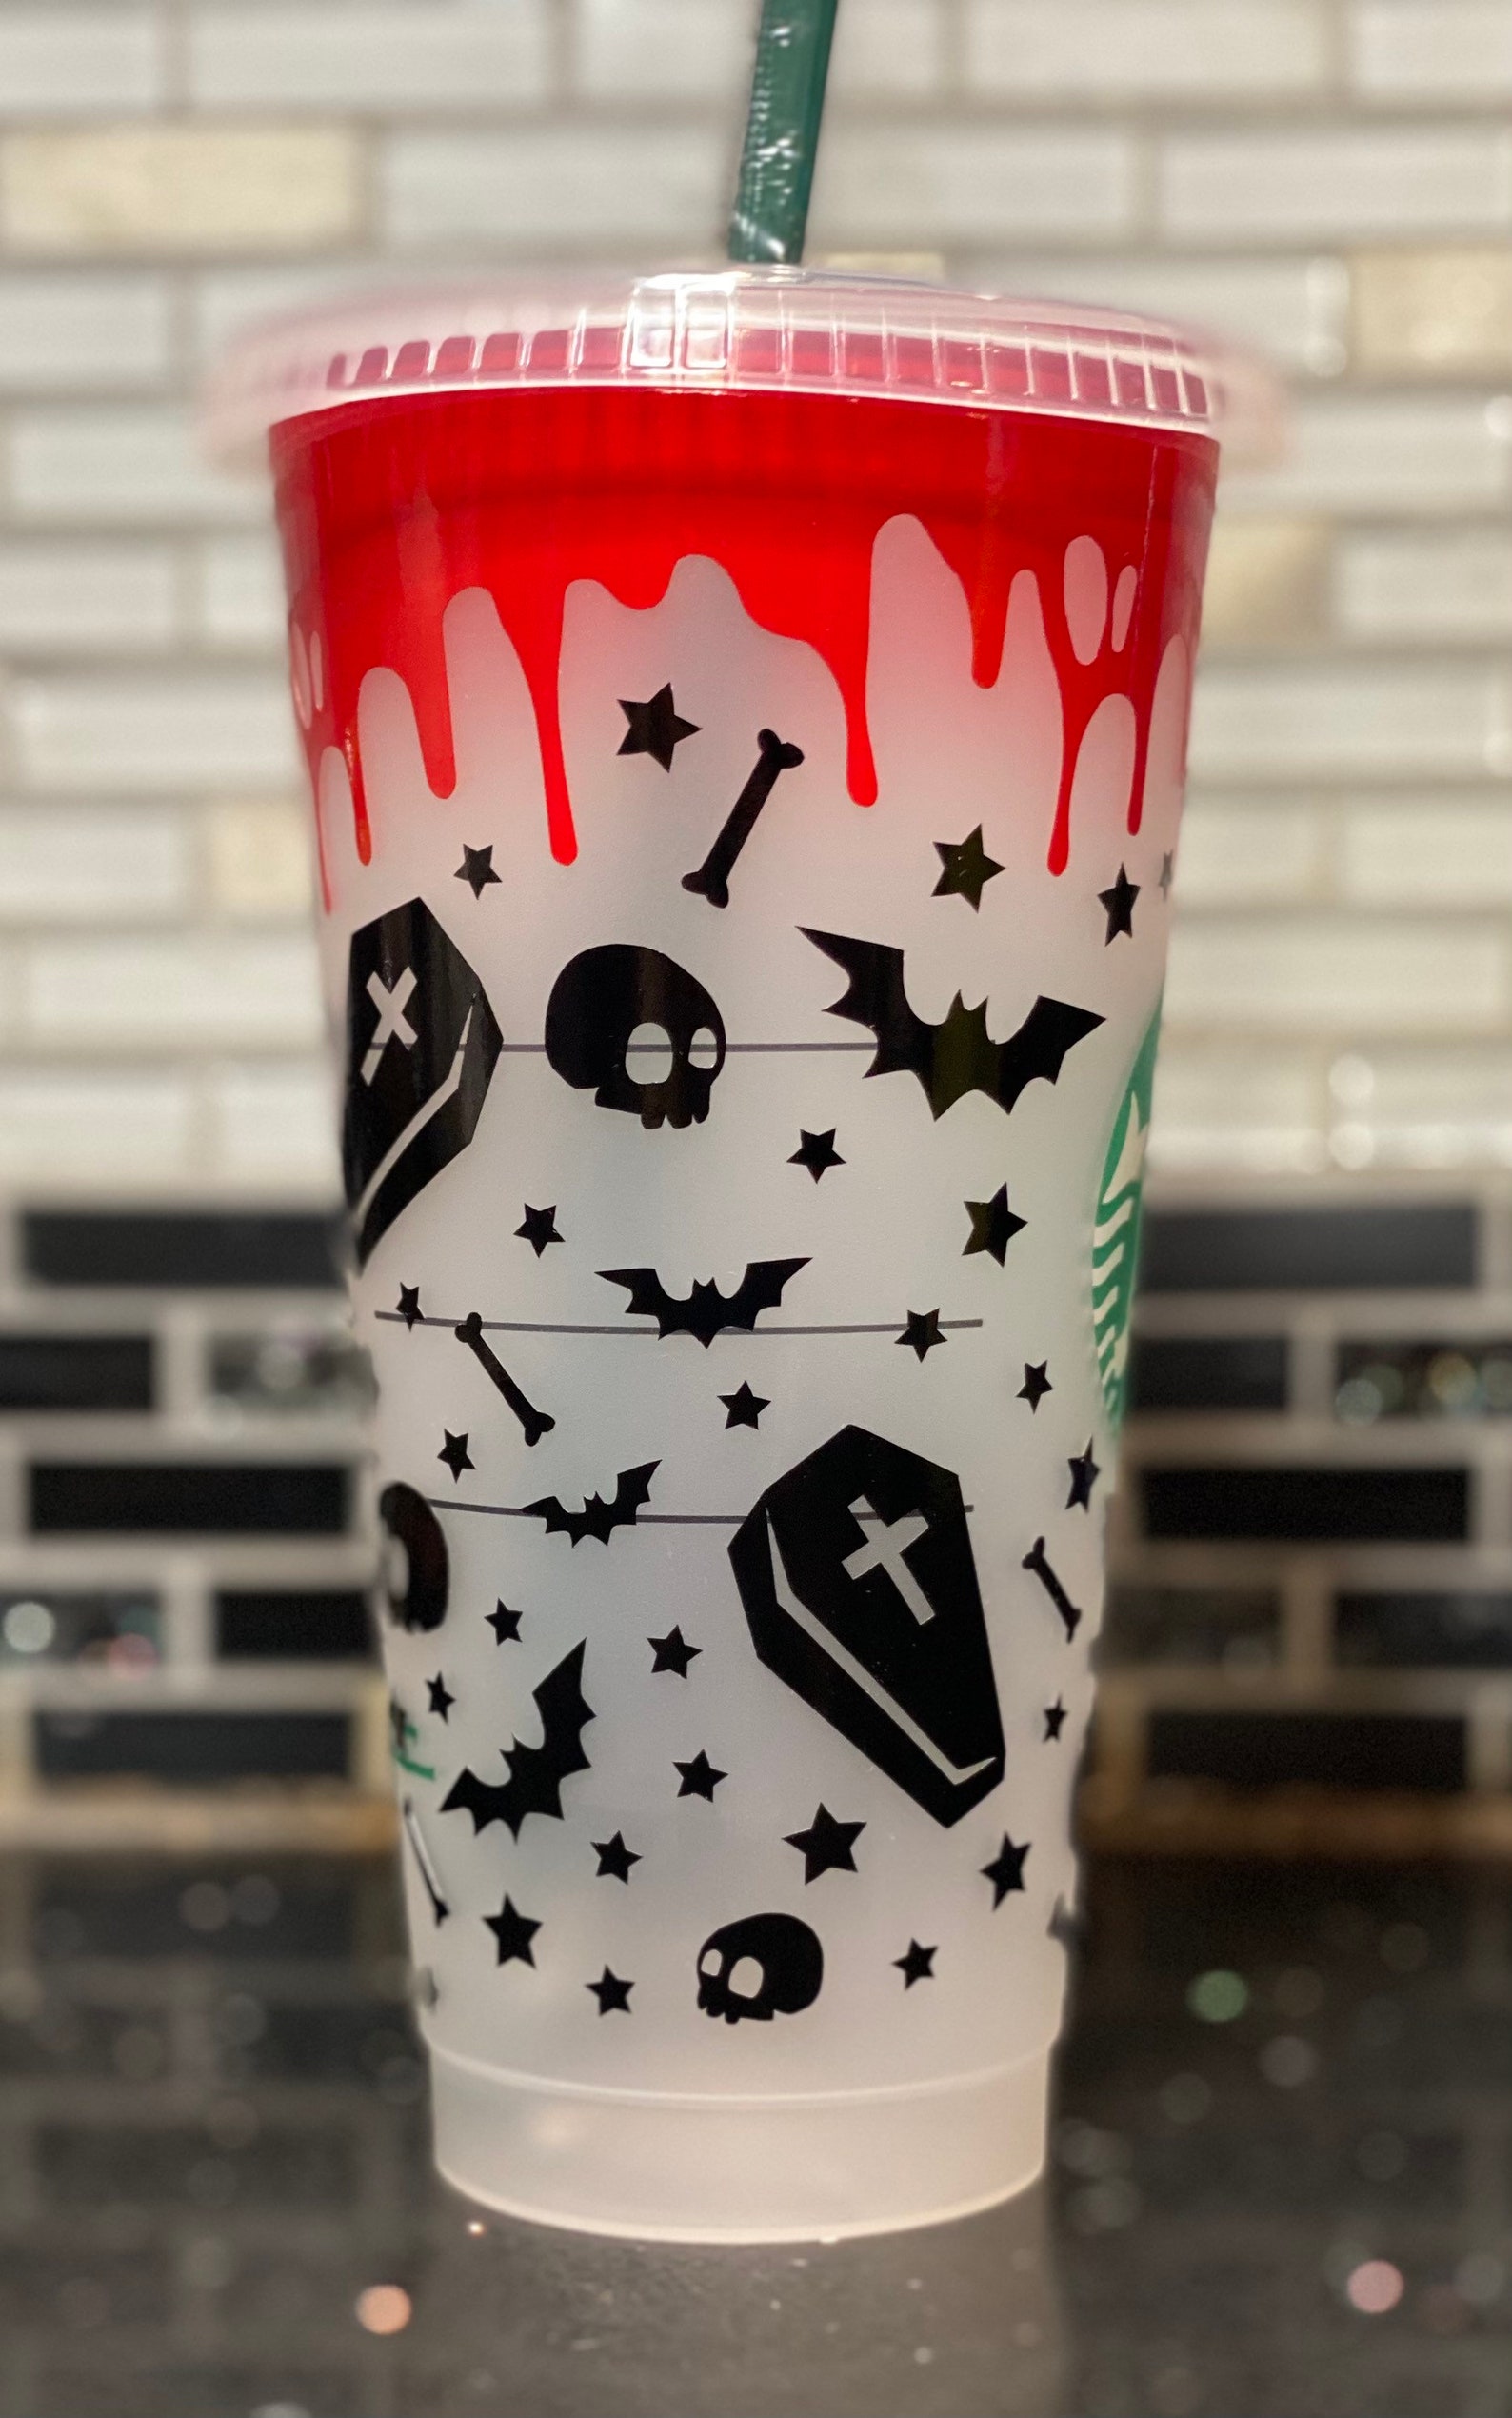 Spooky chiller Starbucks cup Blood drip cup scary gift | Etsy